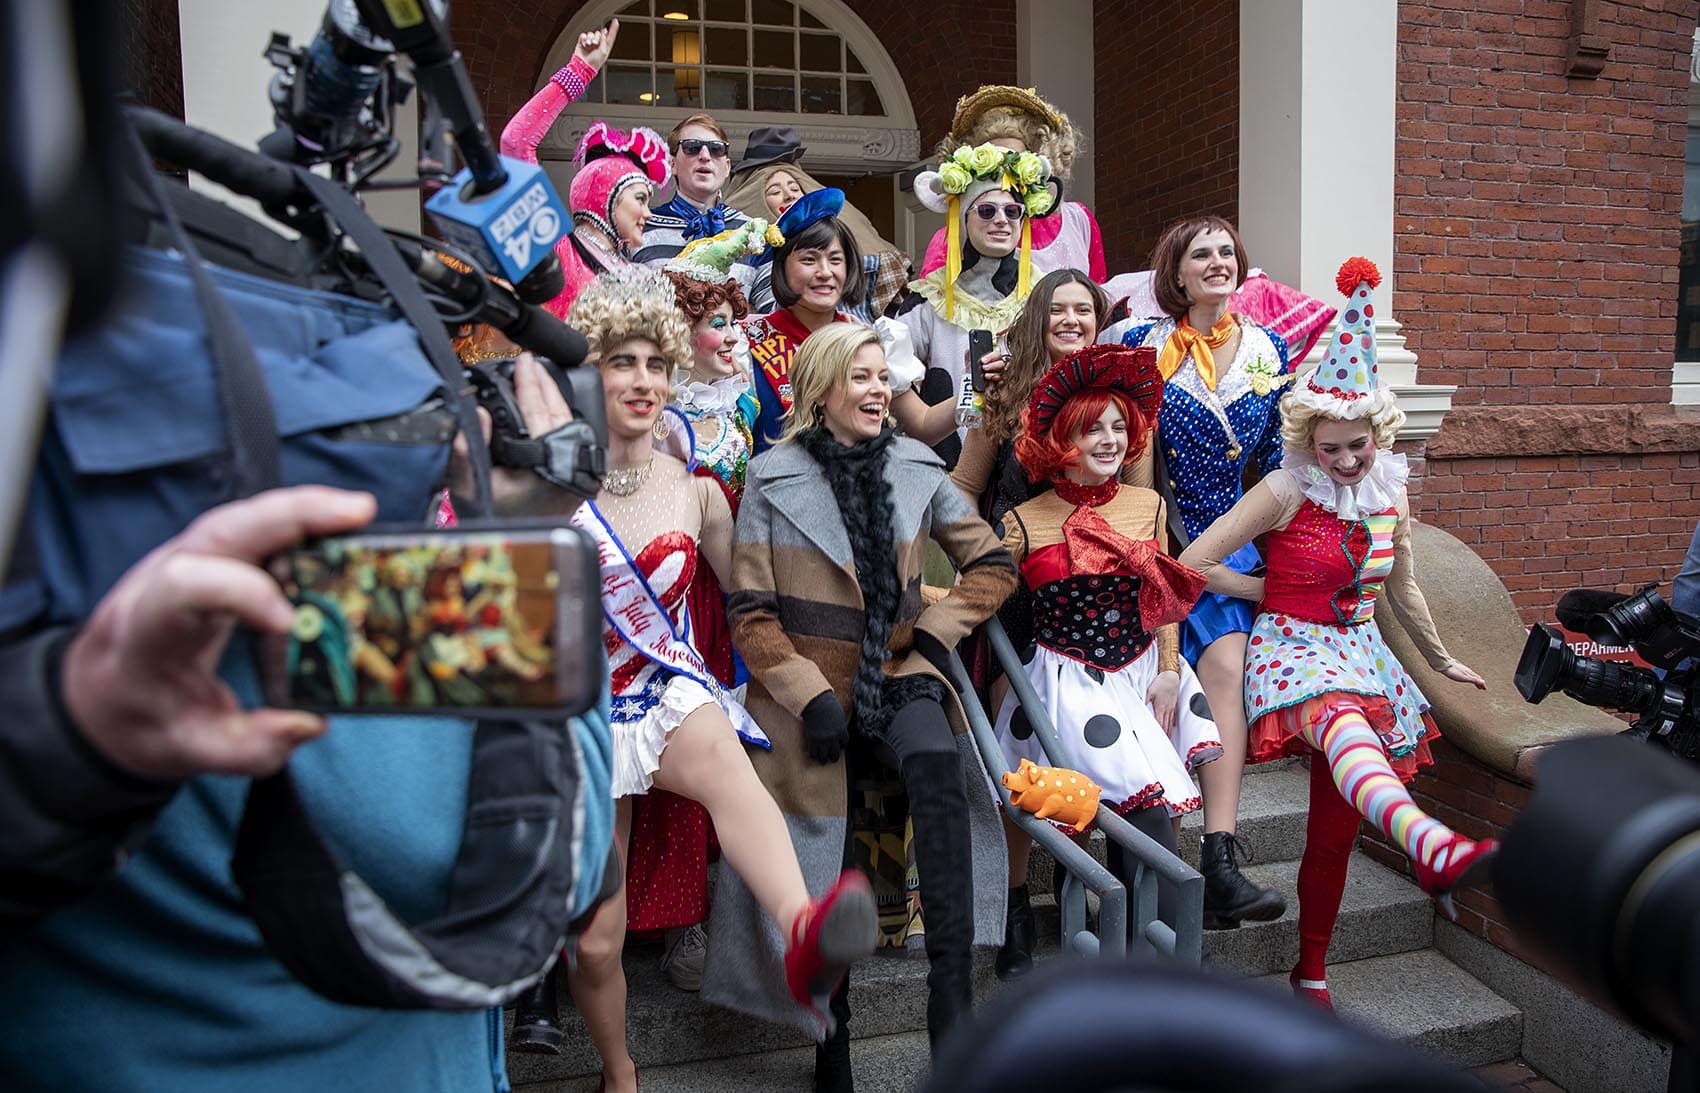 Elizabeth Banks, Hasty Pudding Theatricals’ 2020 Woman of the Year, lines up with Hasty Pudding actors for a photo on the steps of Farkas Hall. (Robin Lubbock/WBUR)